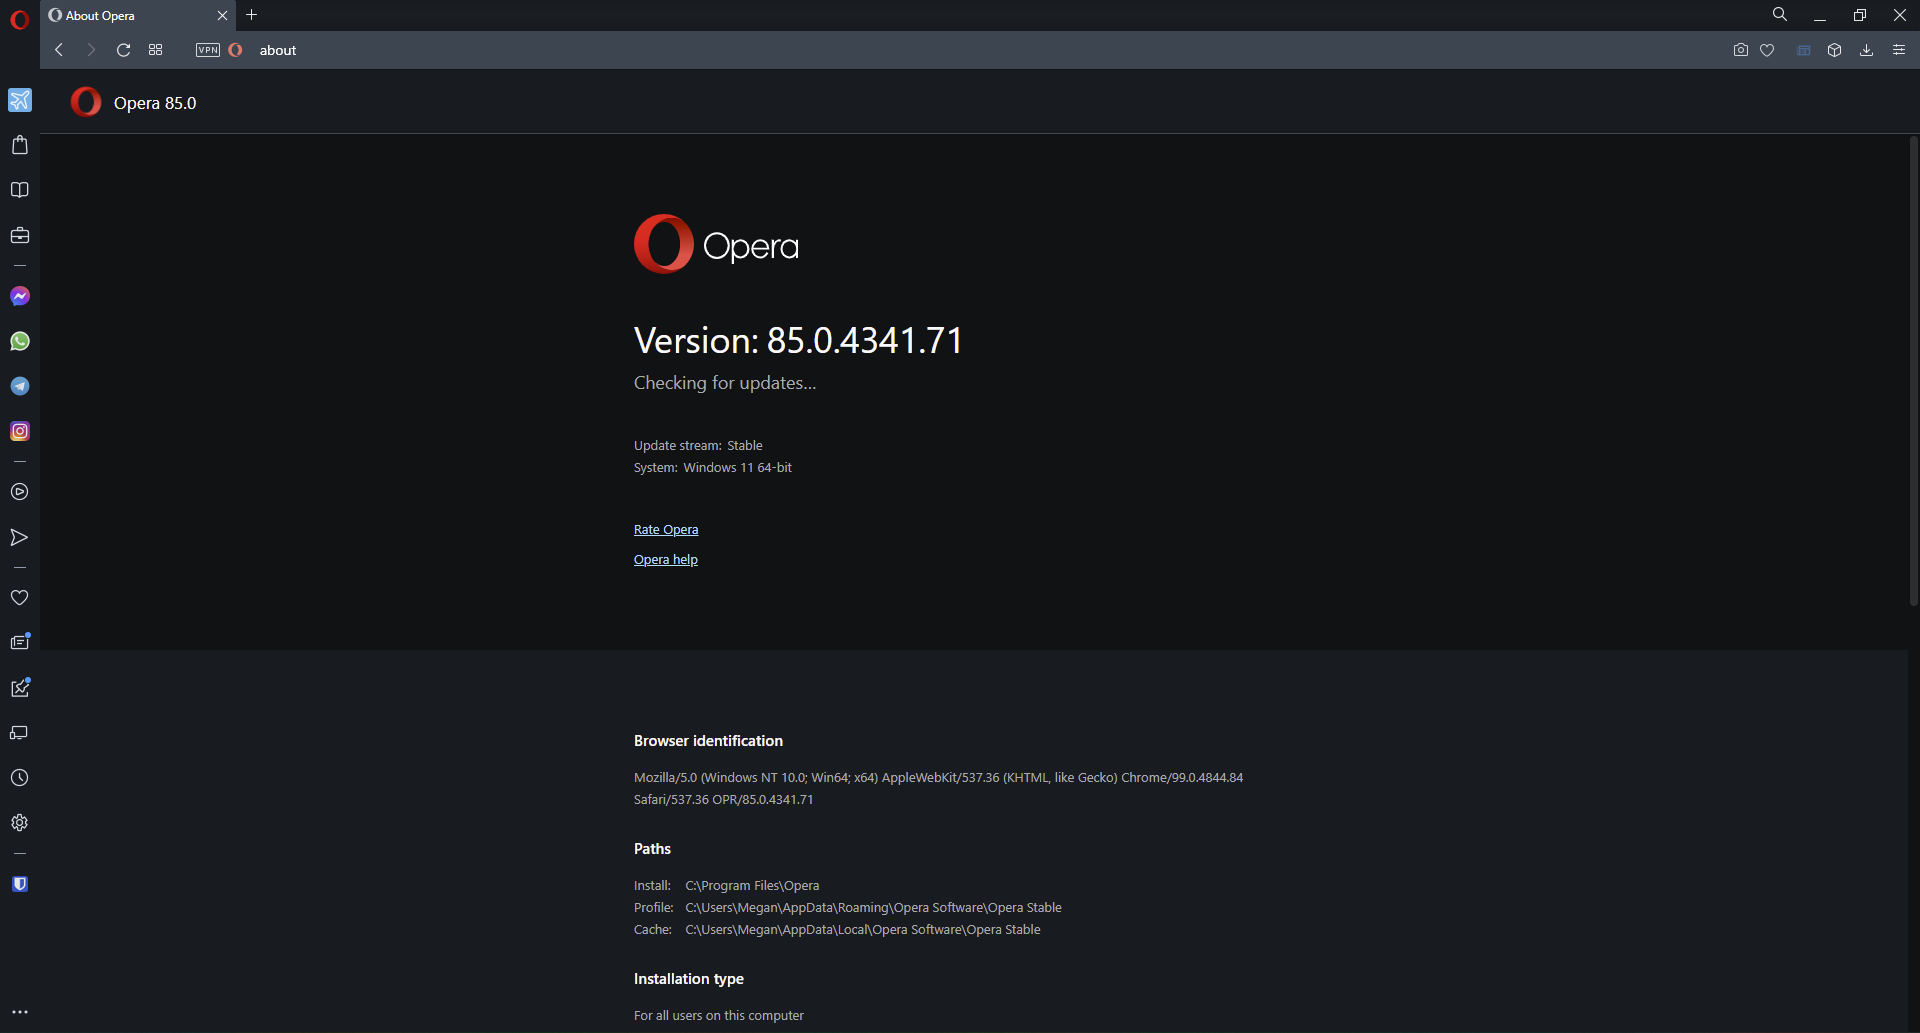 Check for the latest version of Opera.